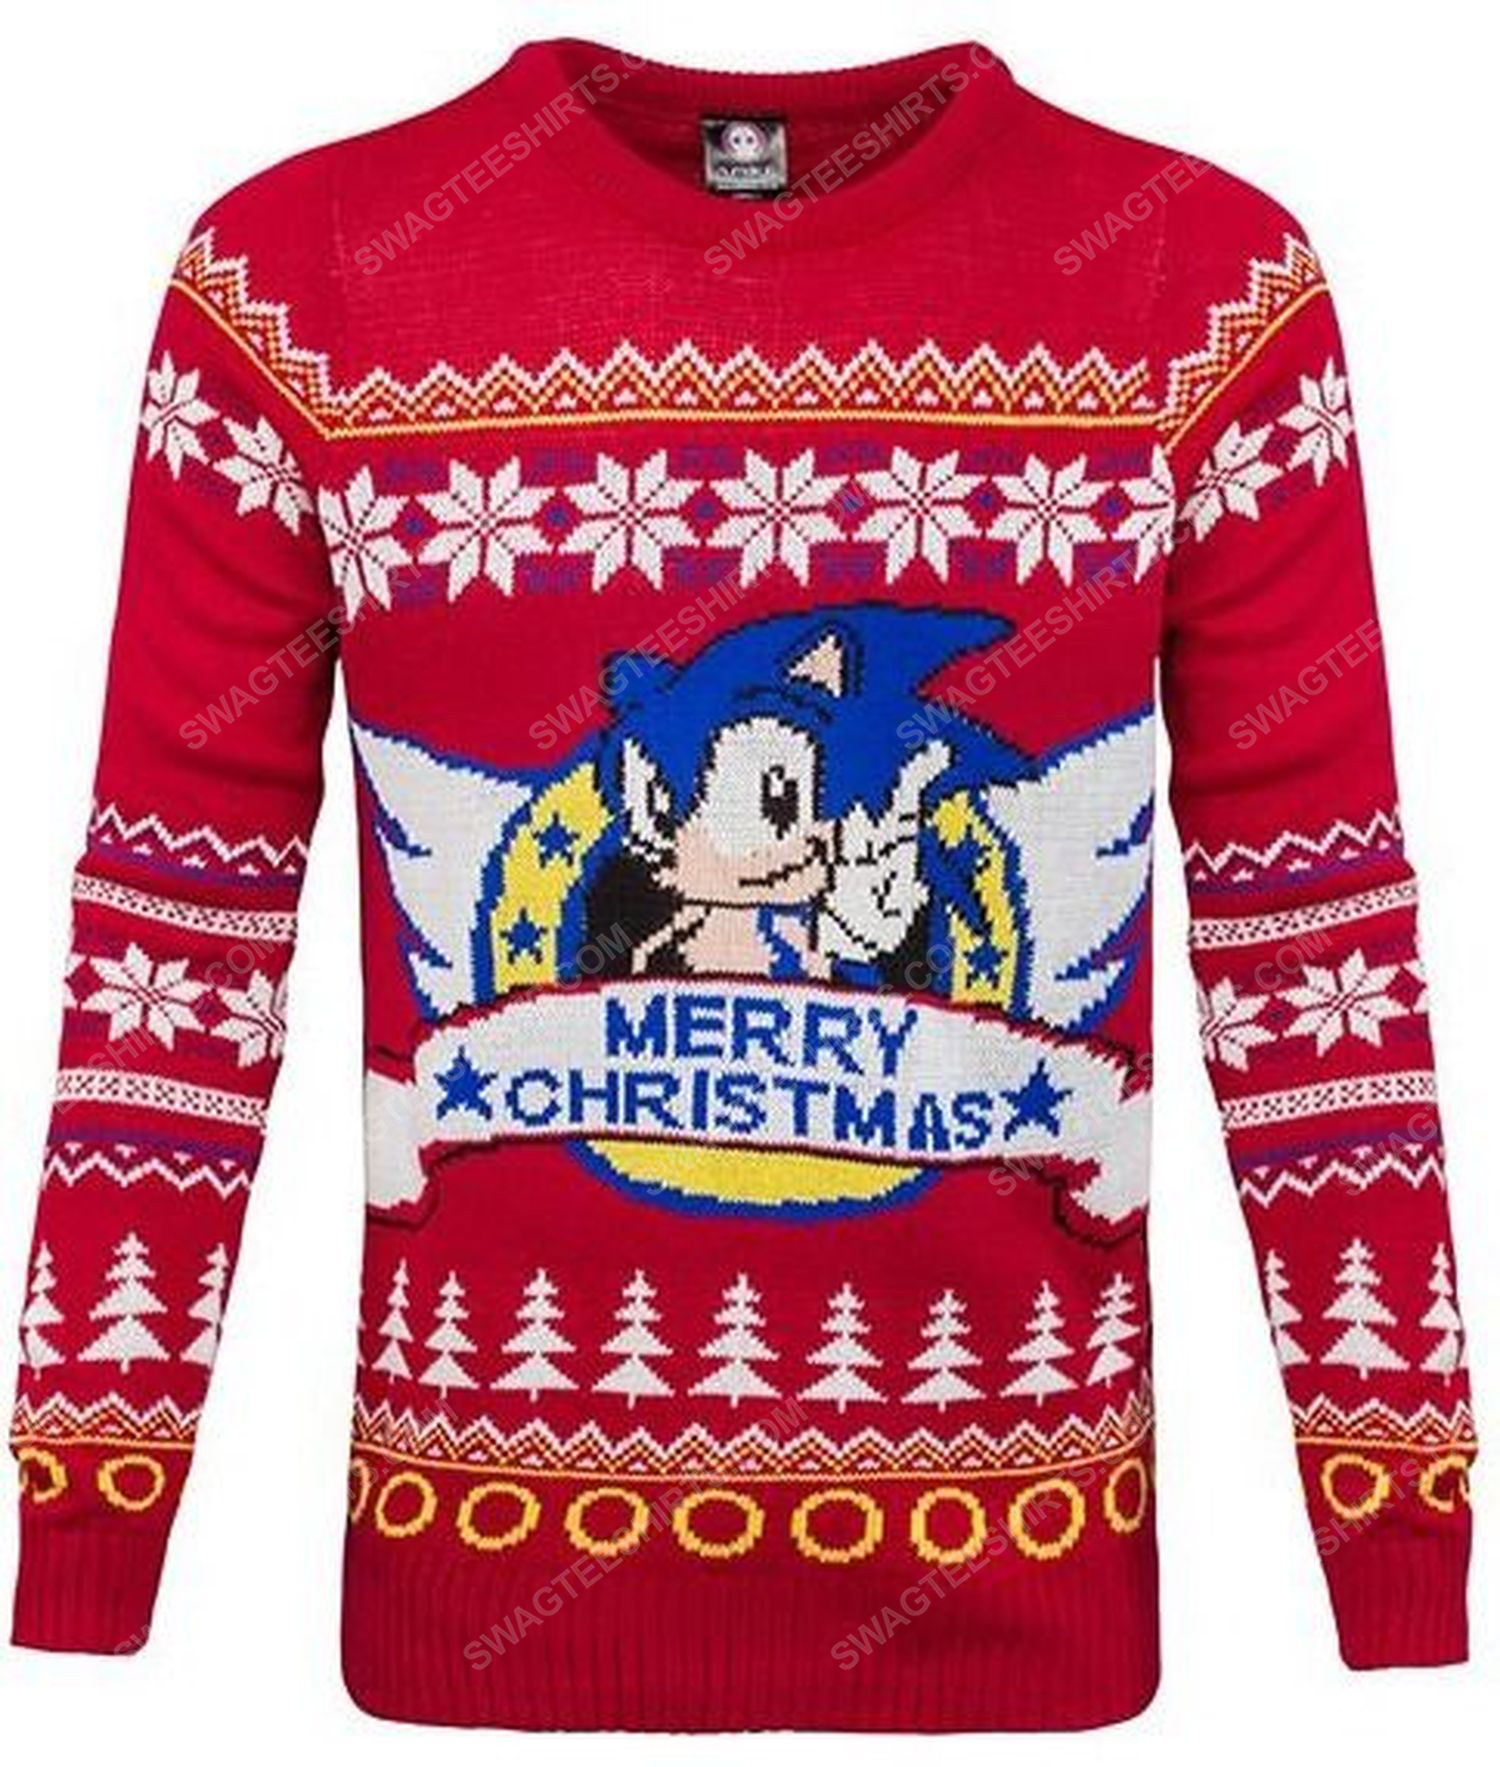 Sonic the hedgehog and merry christmas full print ugly christmas sweater 2 - Copy (2)